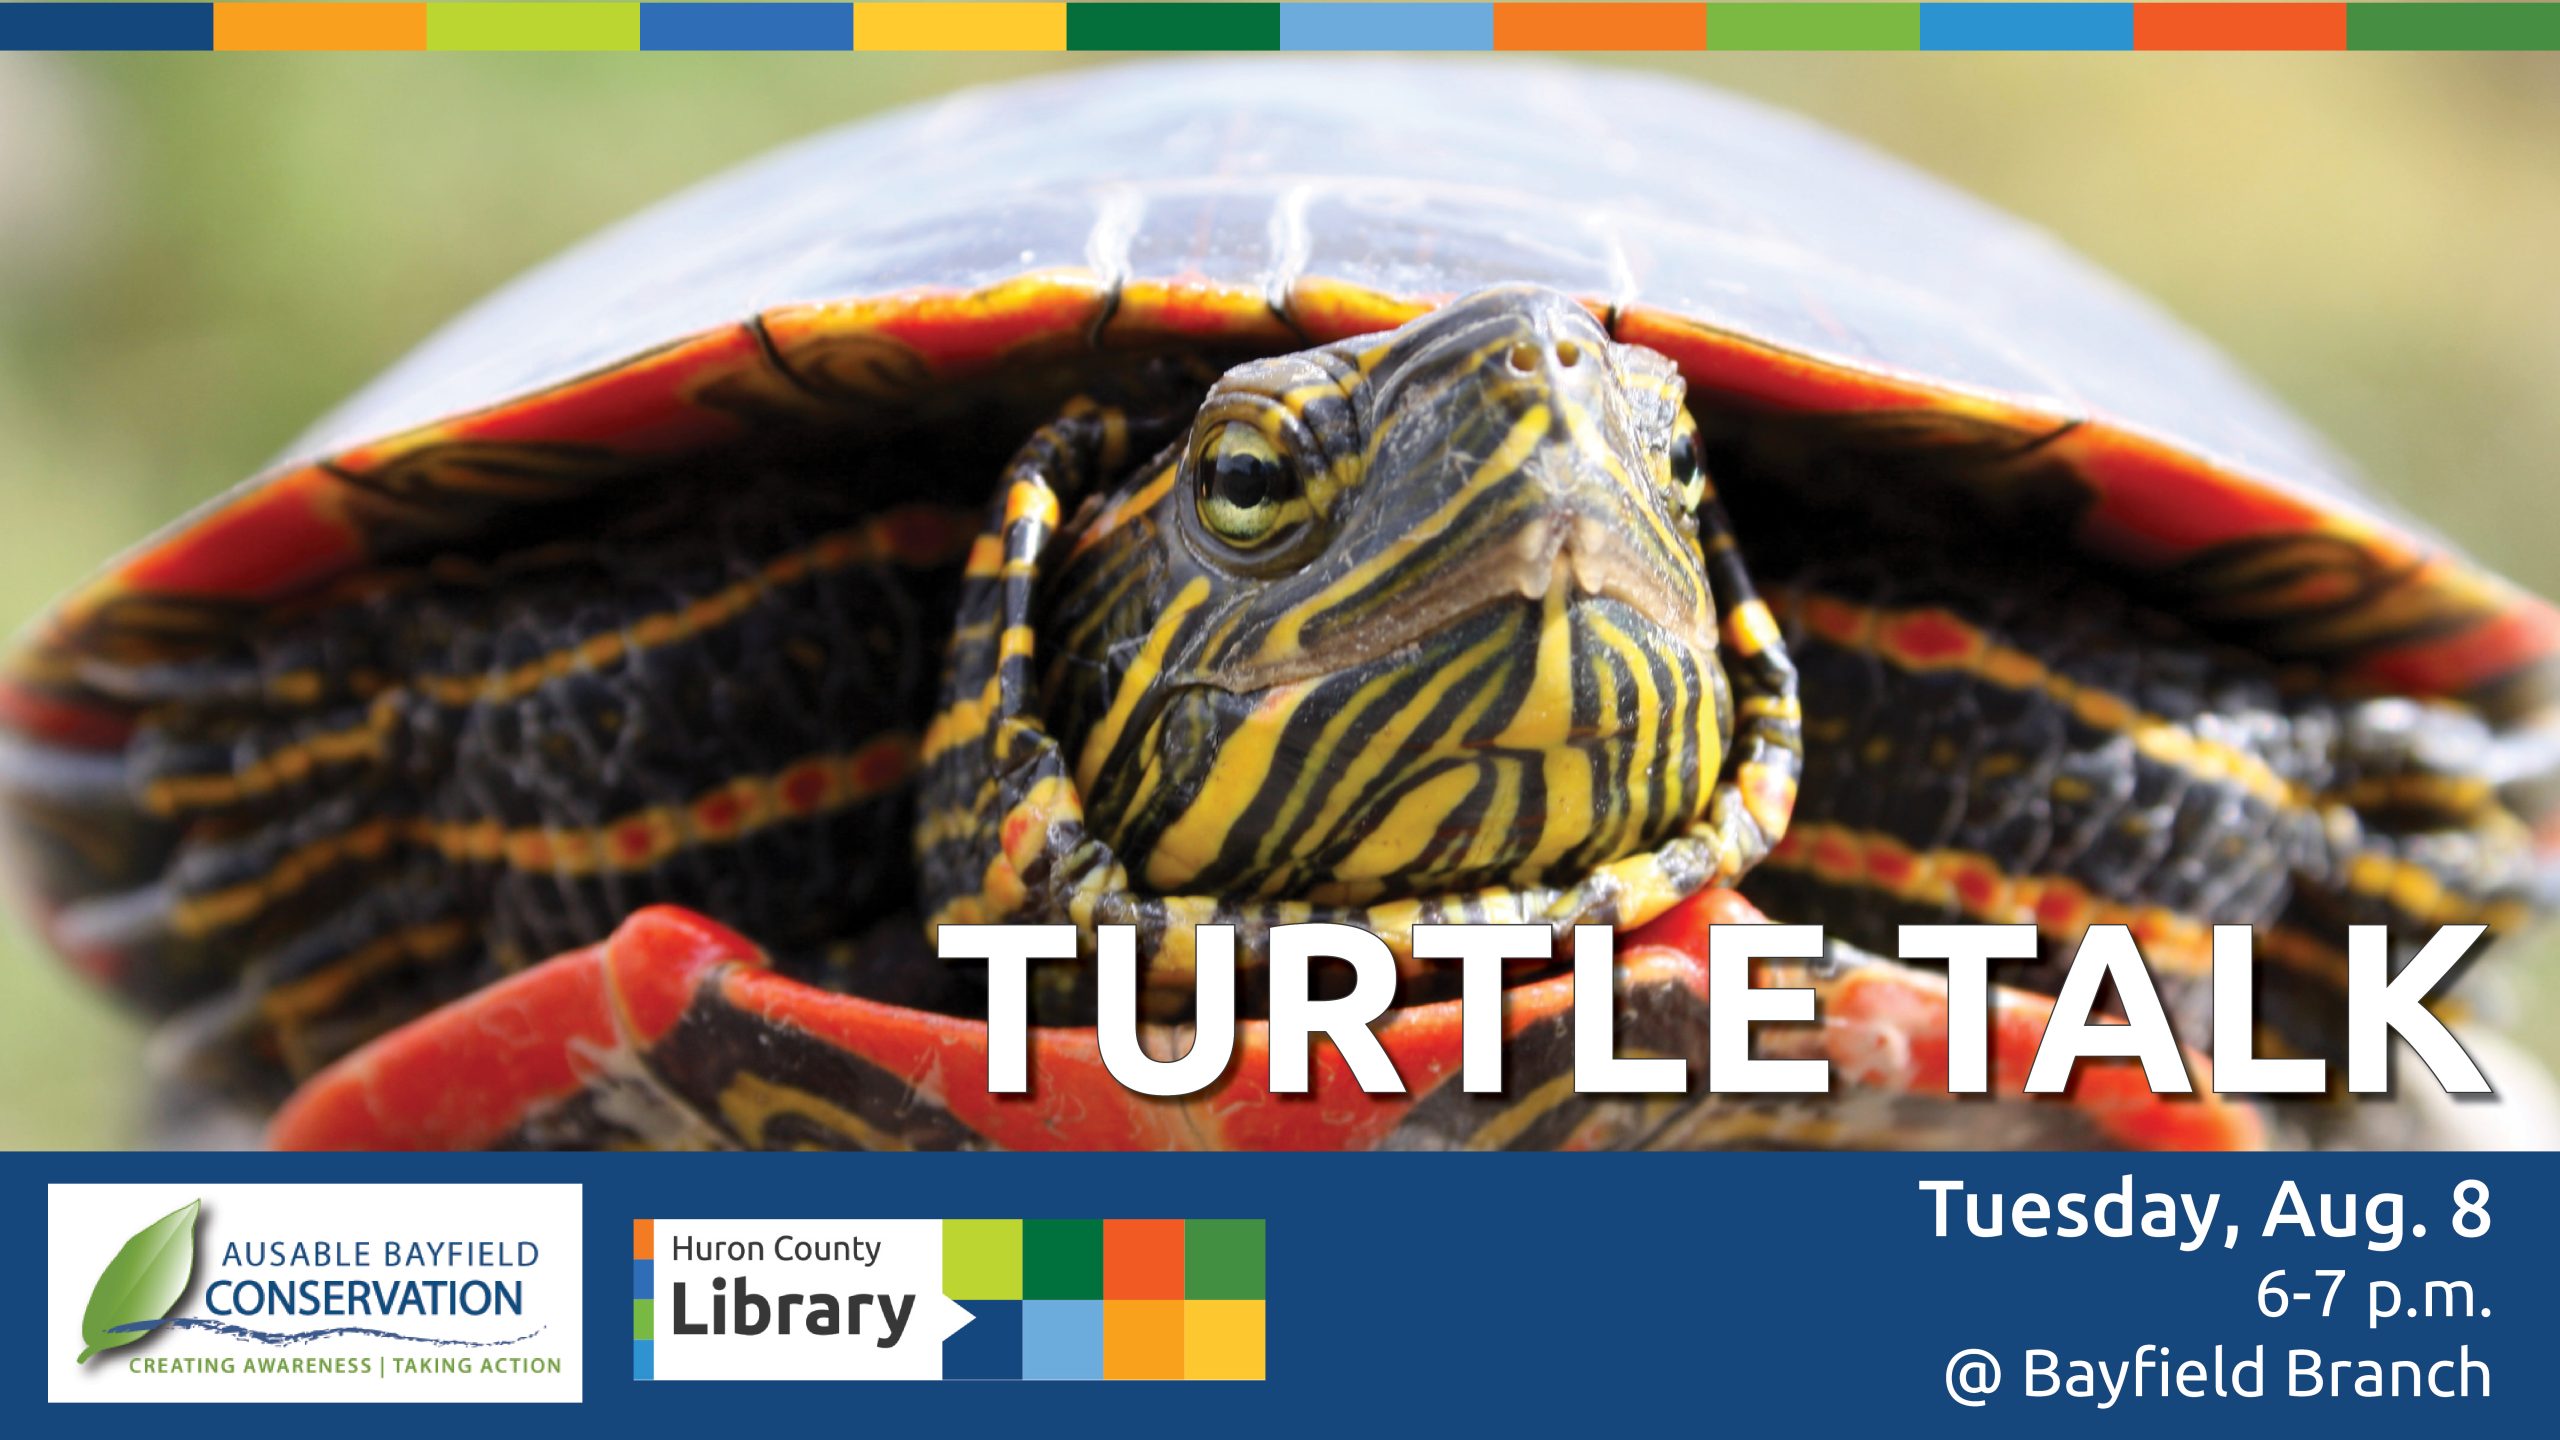 Image of a turtle with text promoting Turtle Talk at Bayfield Branch